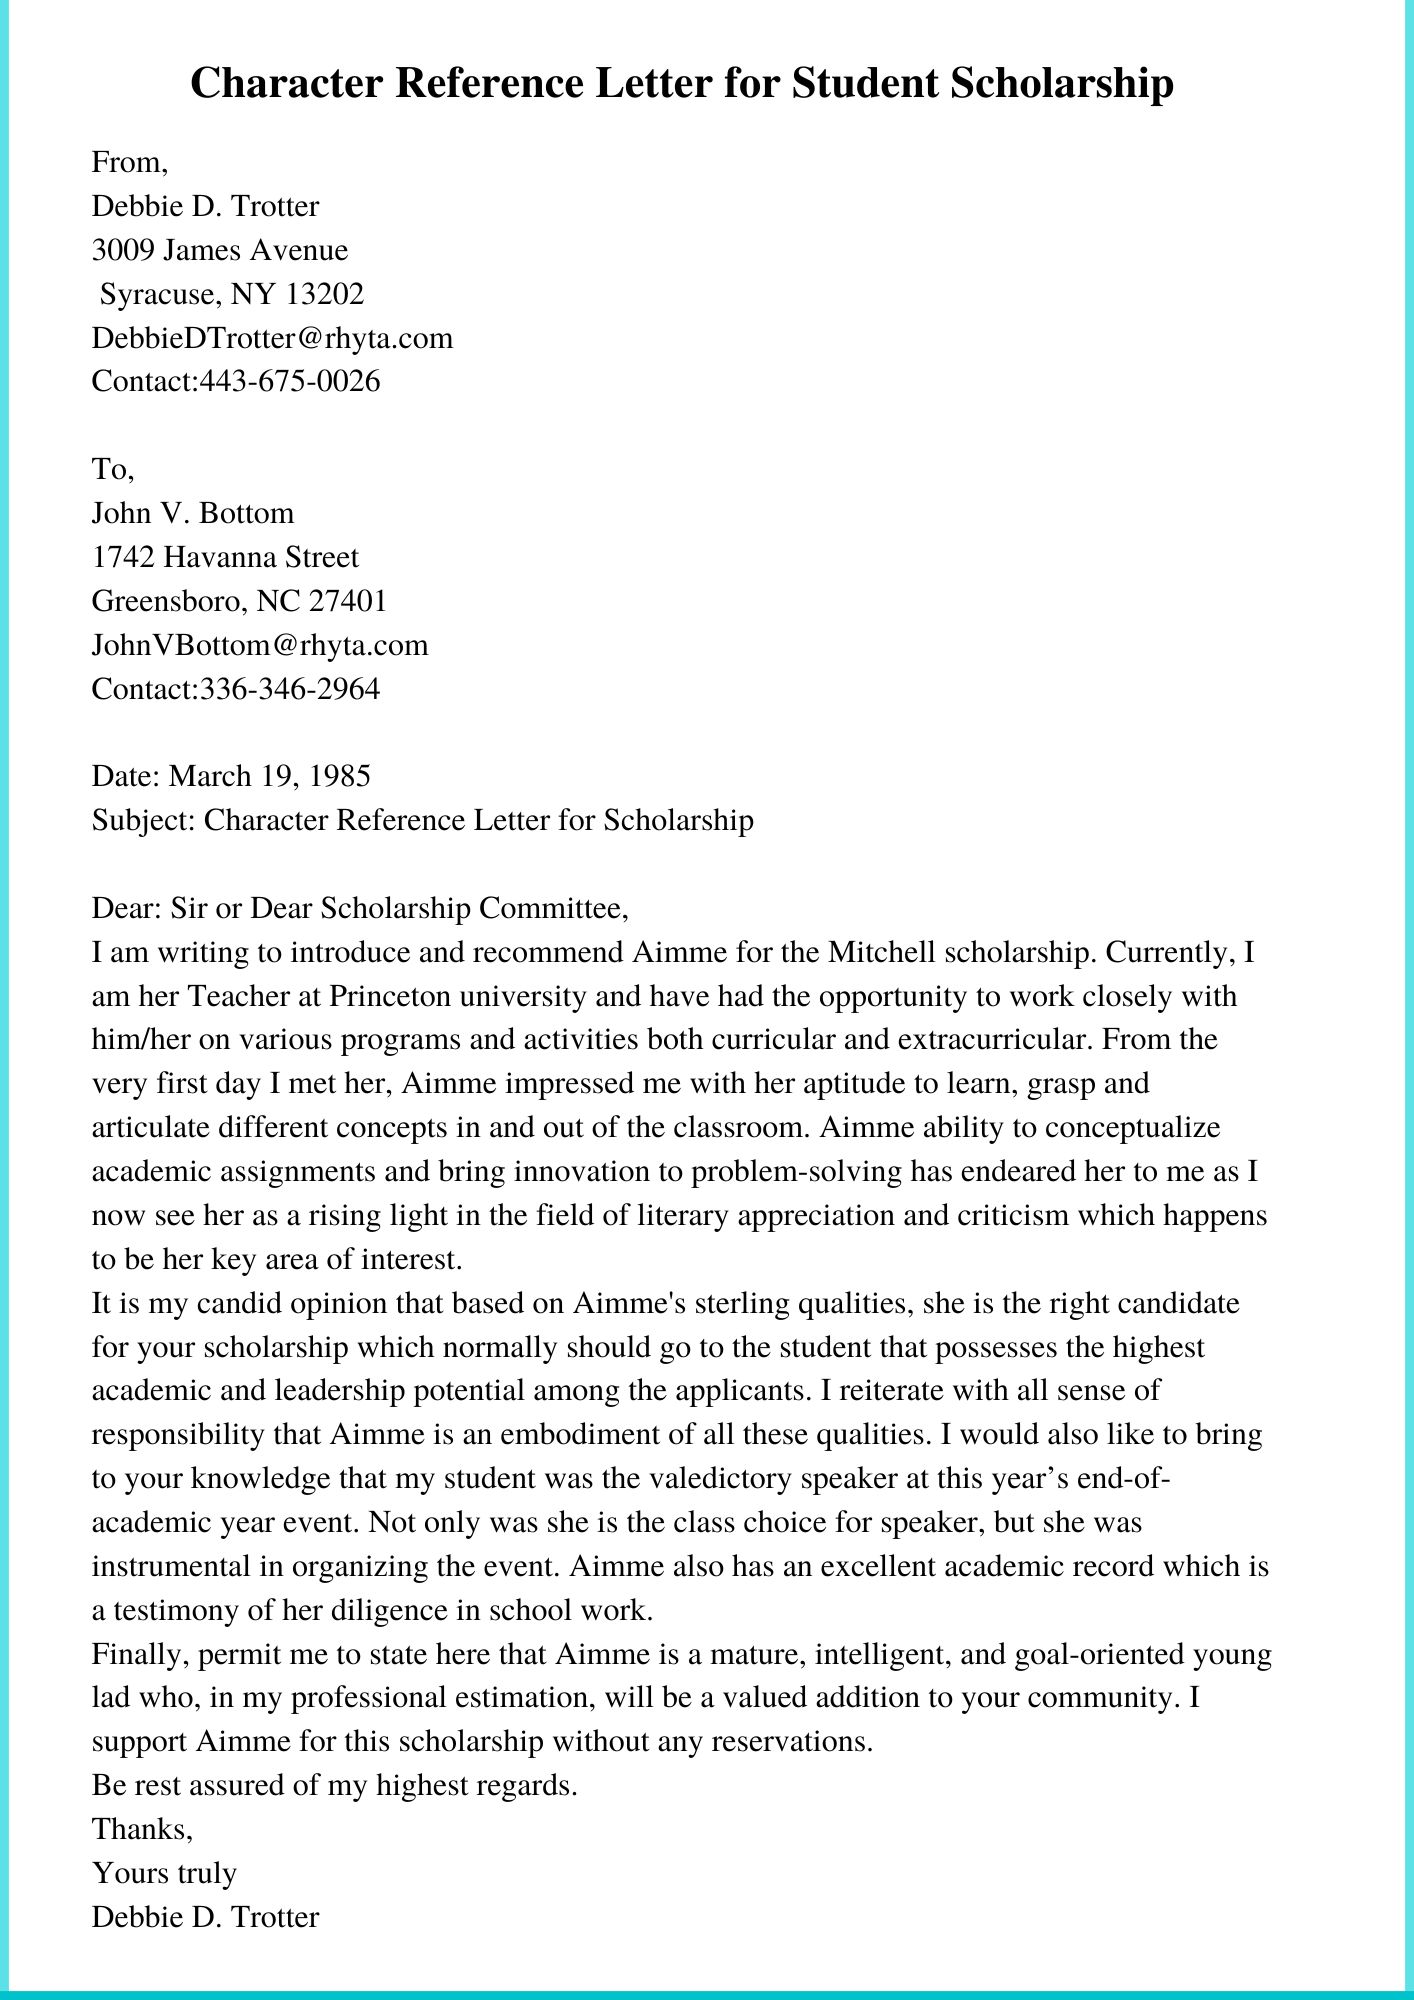 Character Reference Letter for Scholarship